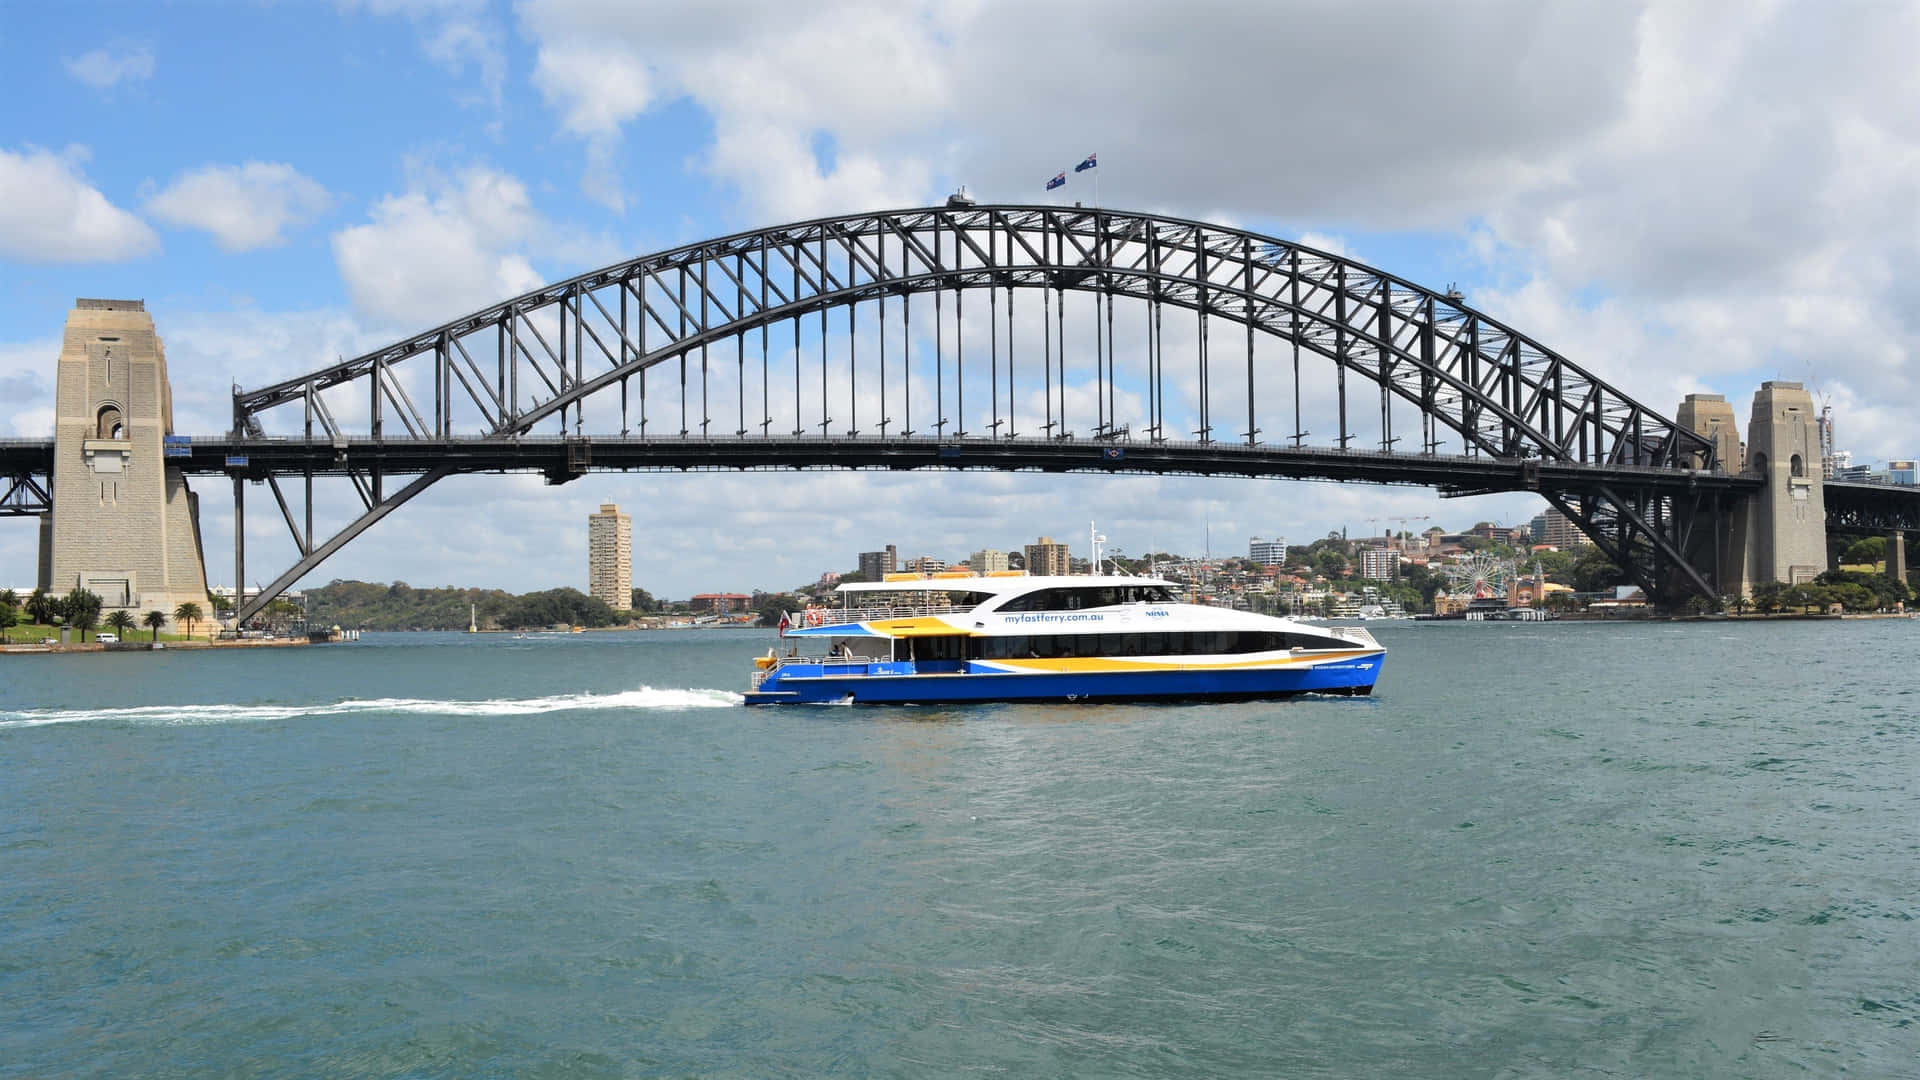 Sydney Harbour Cruisewith Bridge View Wallpaper